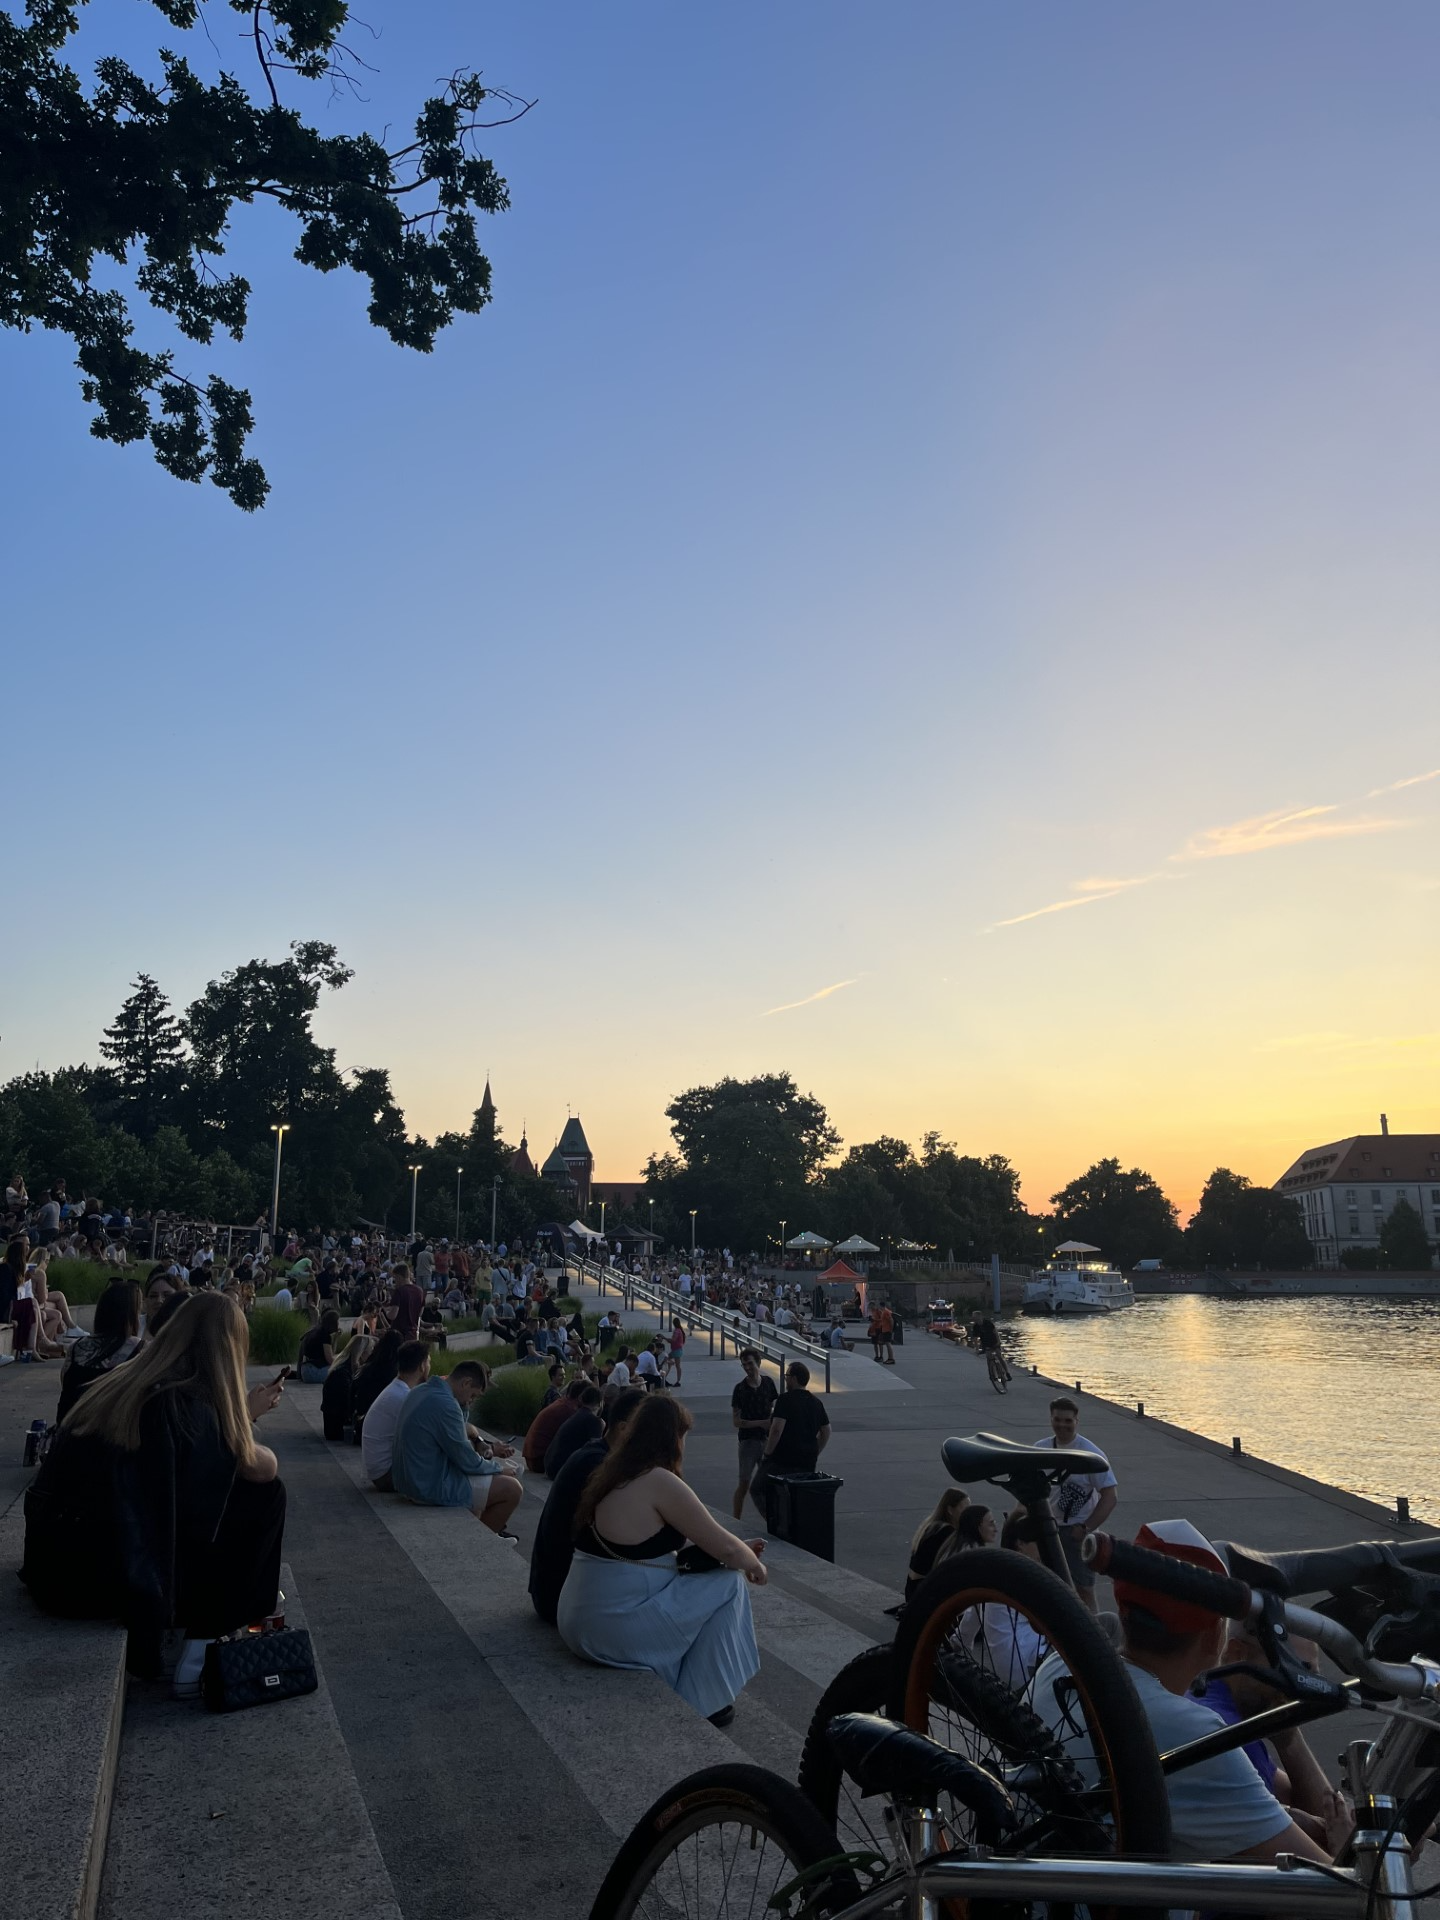 Sunset by the Oder River in Wrocław, Poland